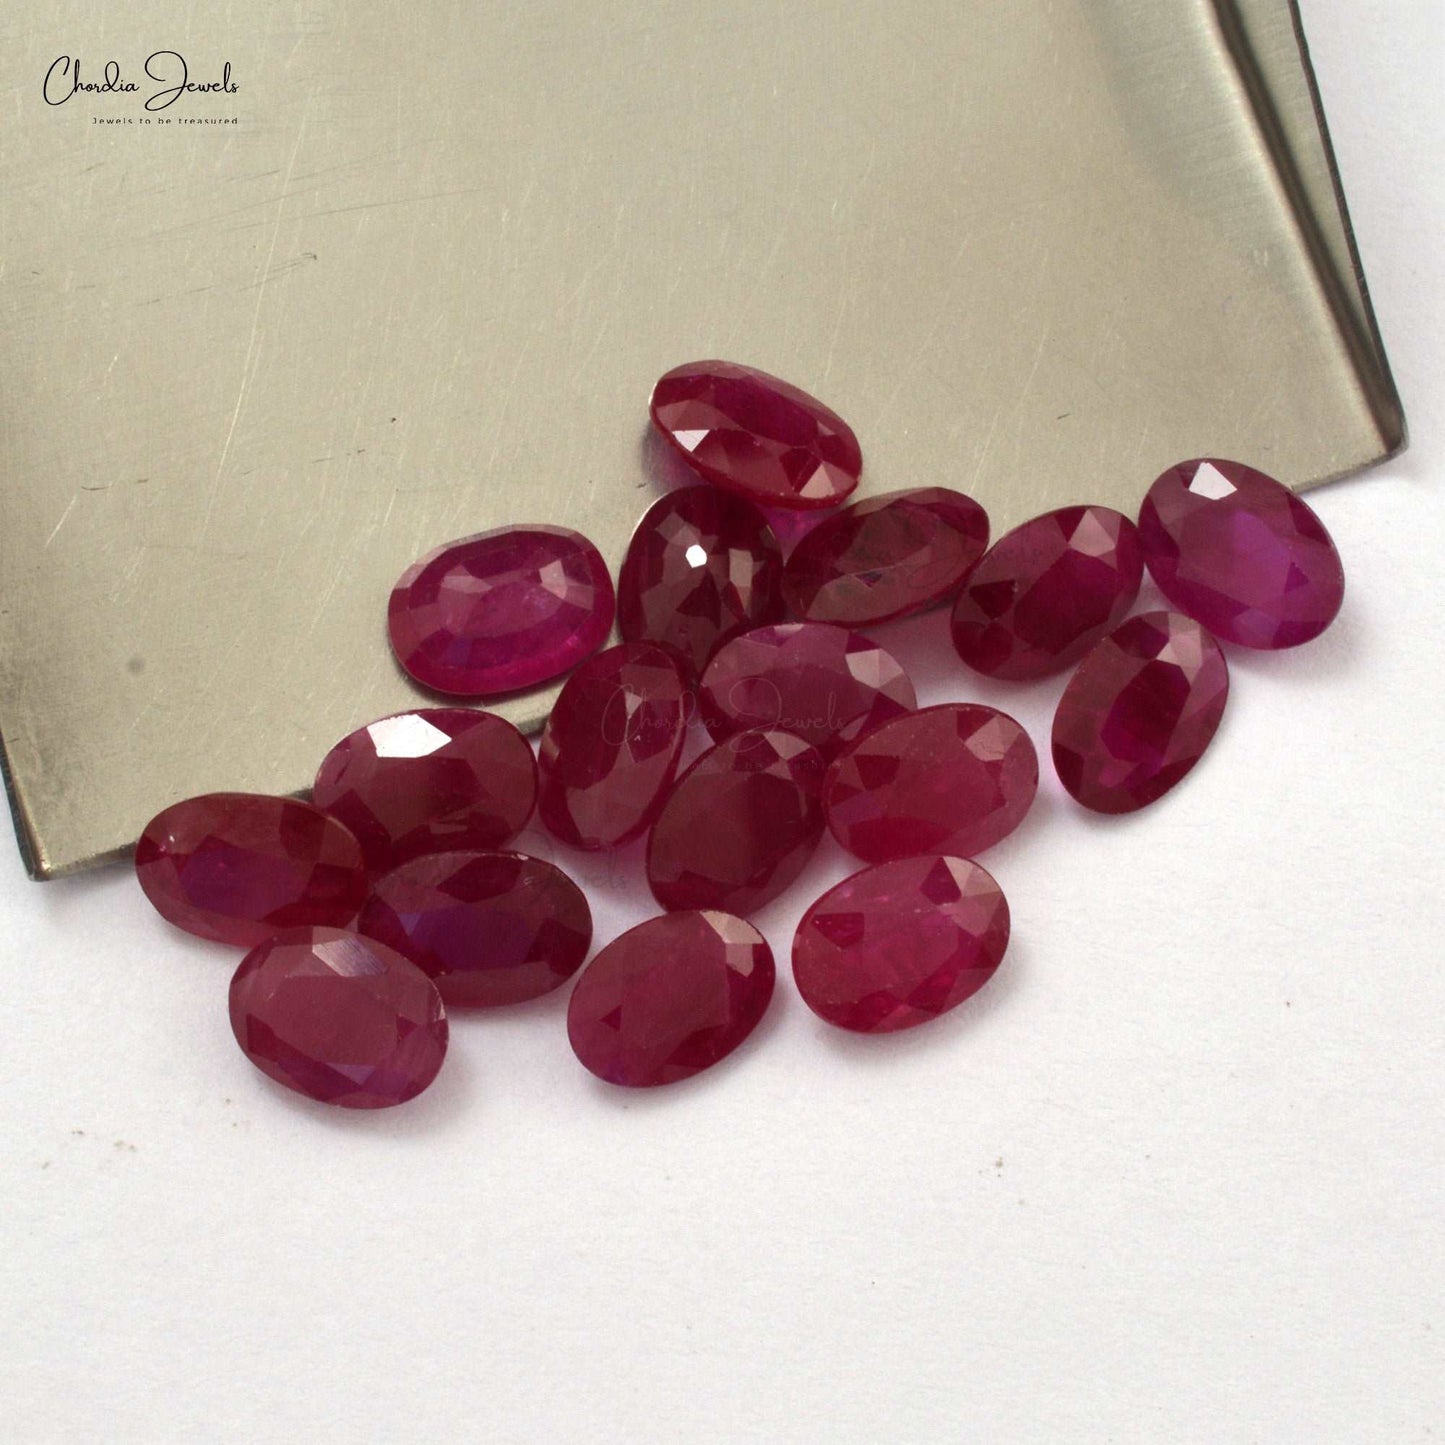 1/2 Carat Oval Cut High Quality Ruby Oval Cut Offer Price, 1 Piece